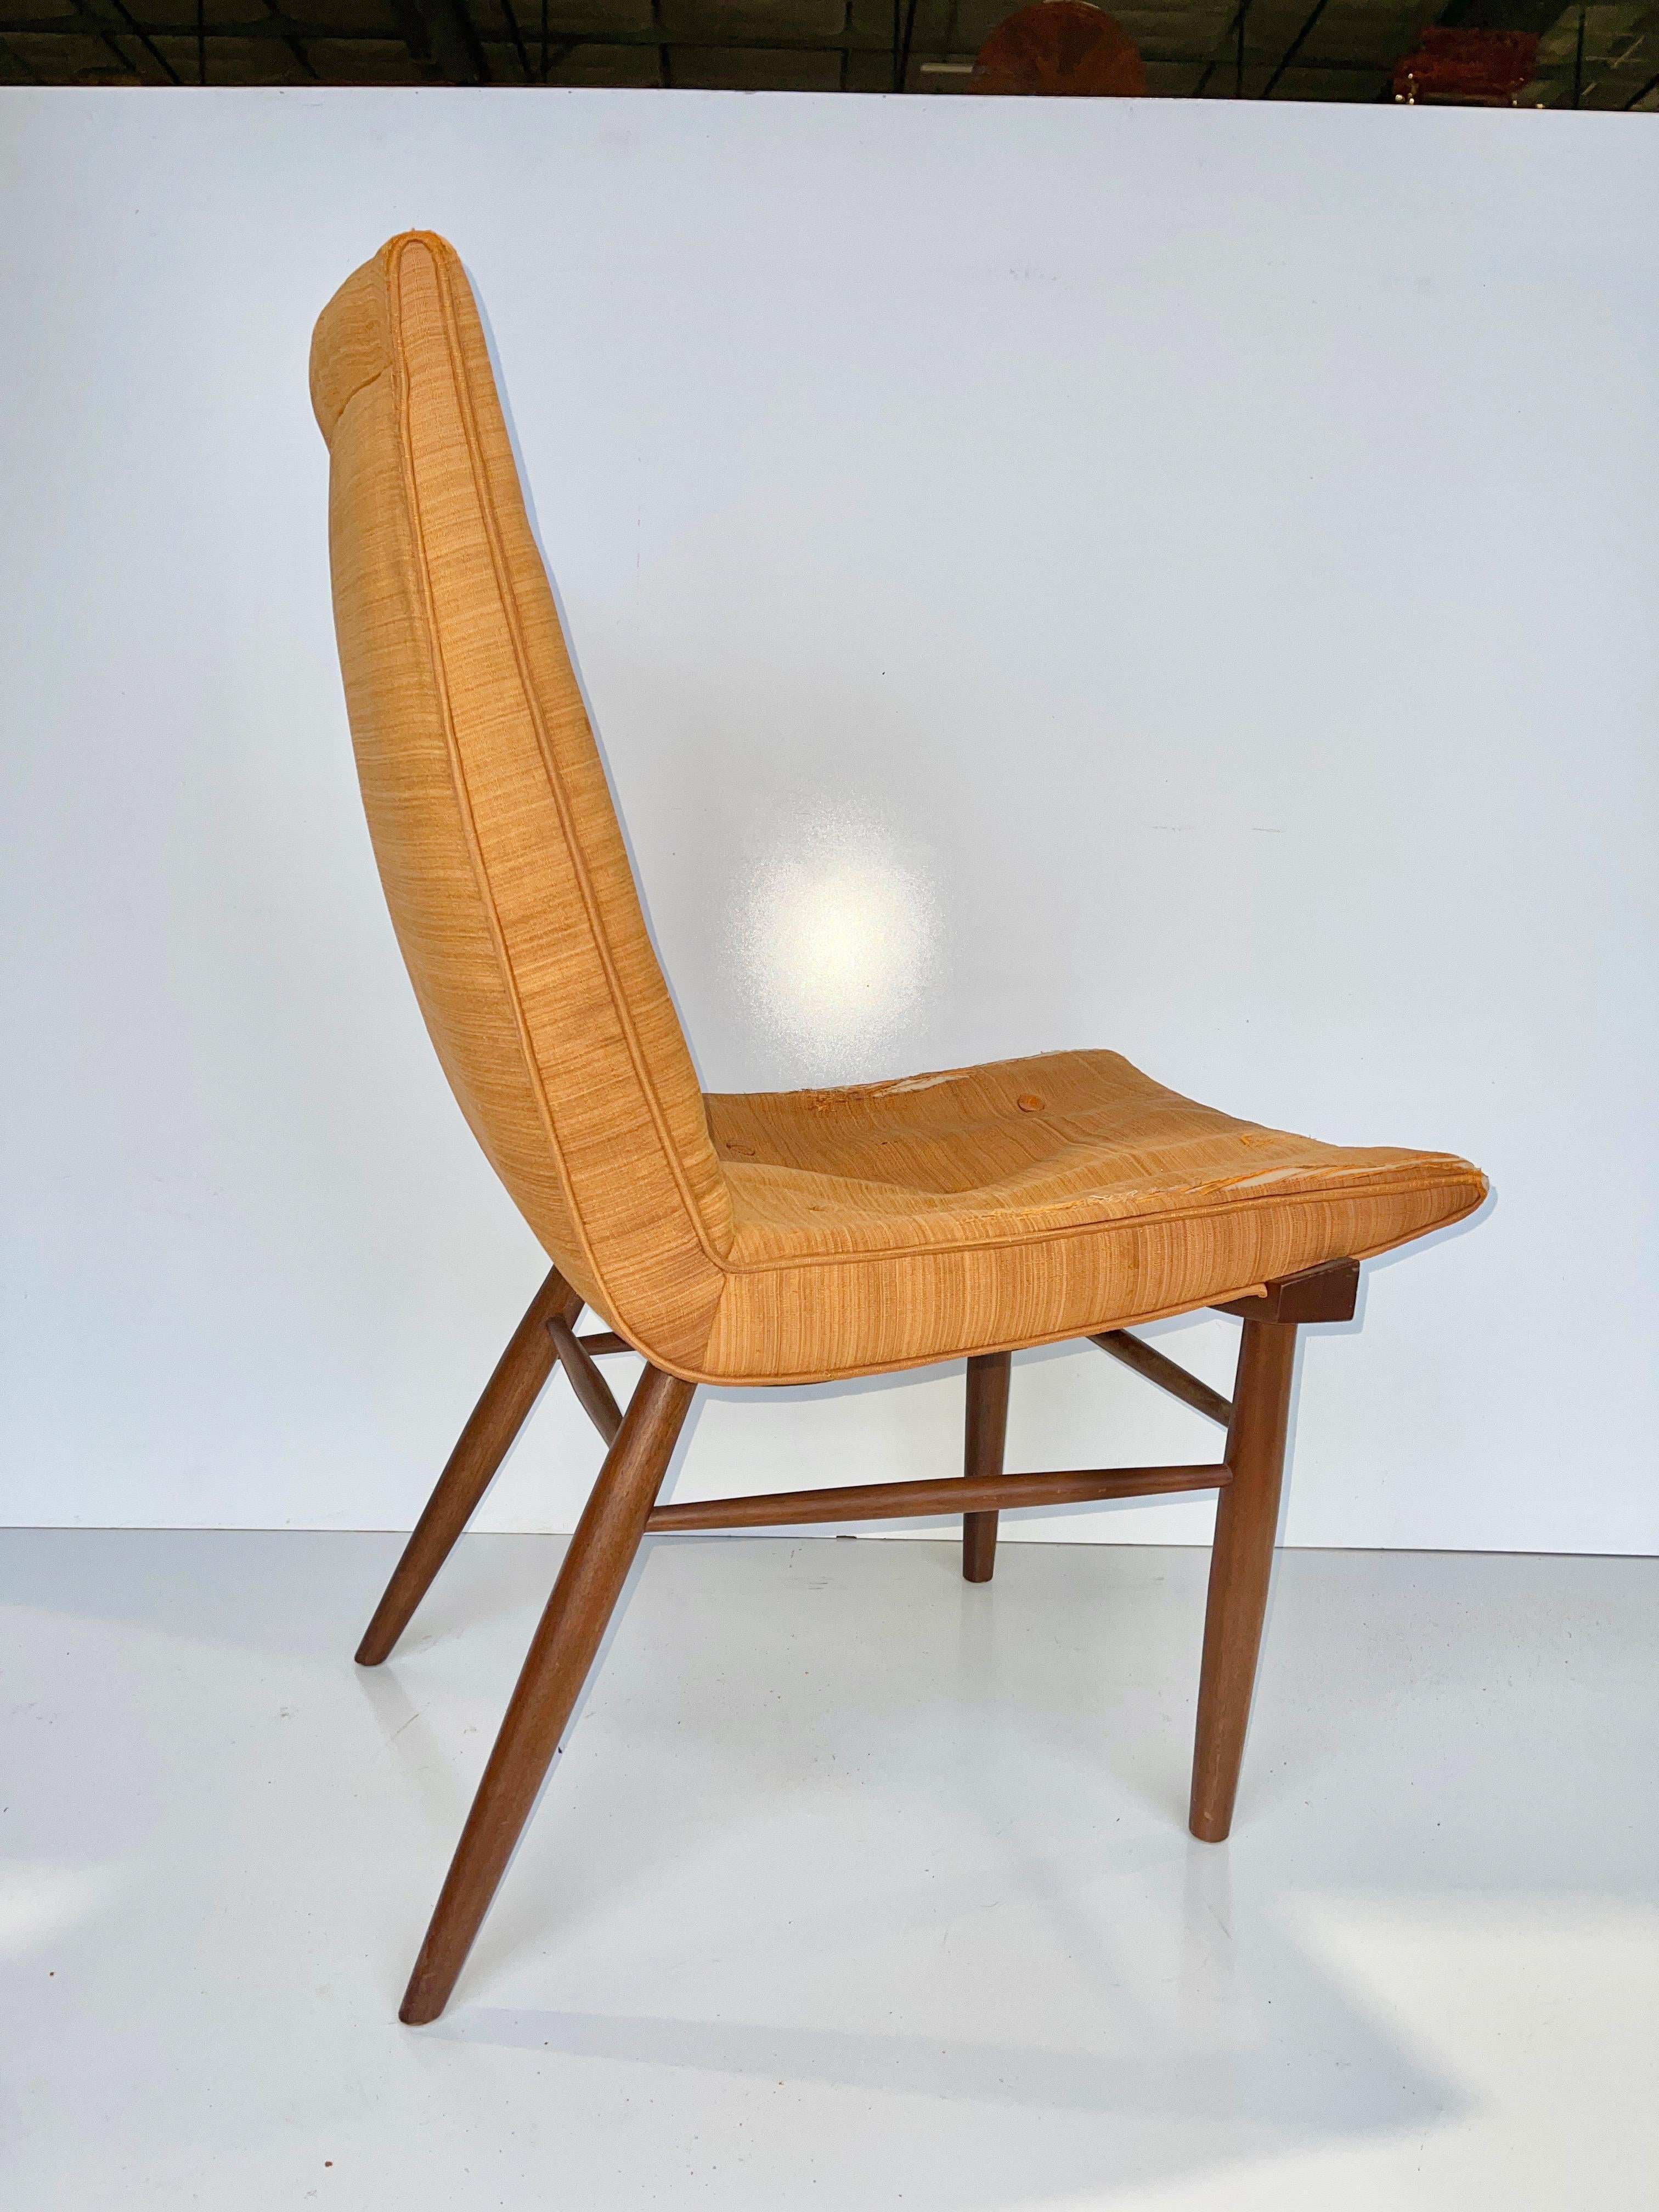 George Nakashima designed Model 206 chair for the Origins Collection for Widdicomb.
Original condition, without any restorations or refinishing. Joints and dowels tight.
Original upholstery. Foam is dried and powdery.
Widdicomb label present.
 